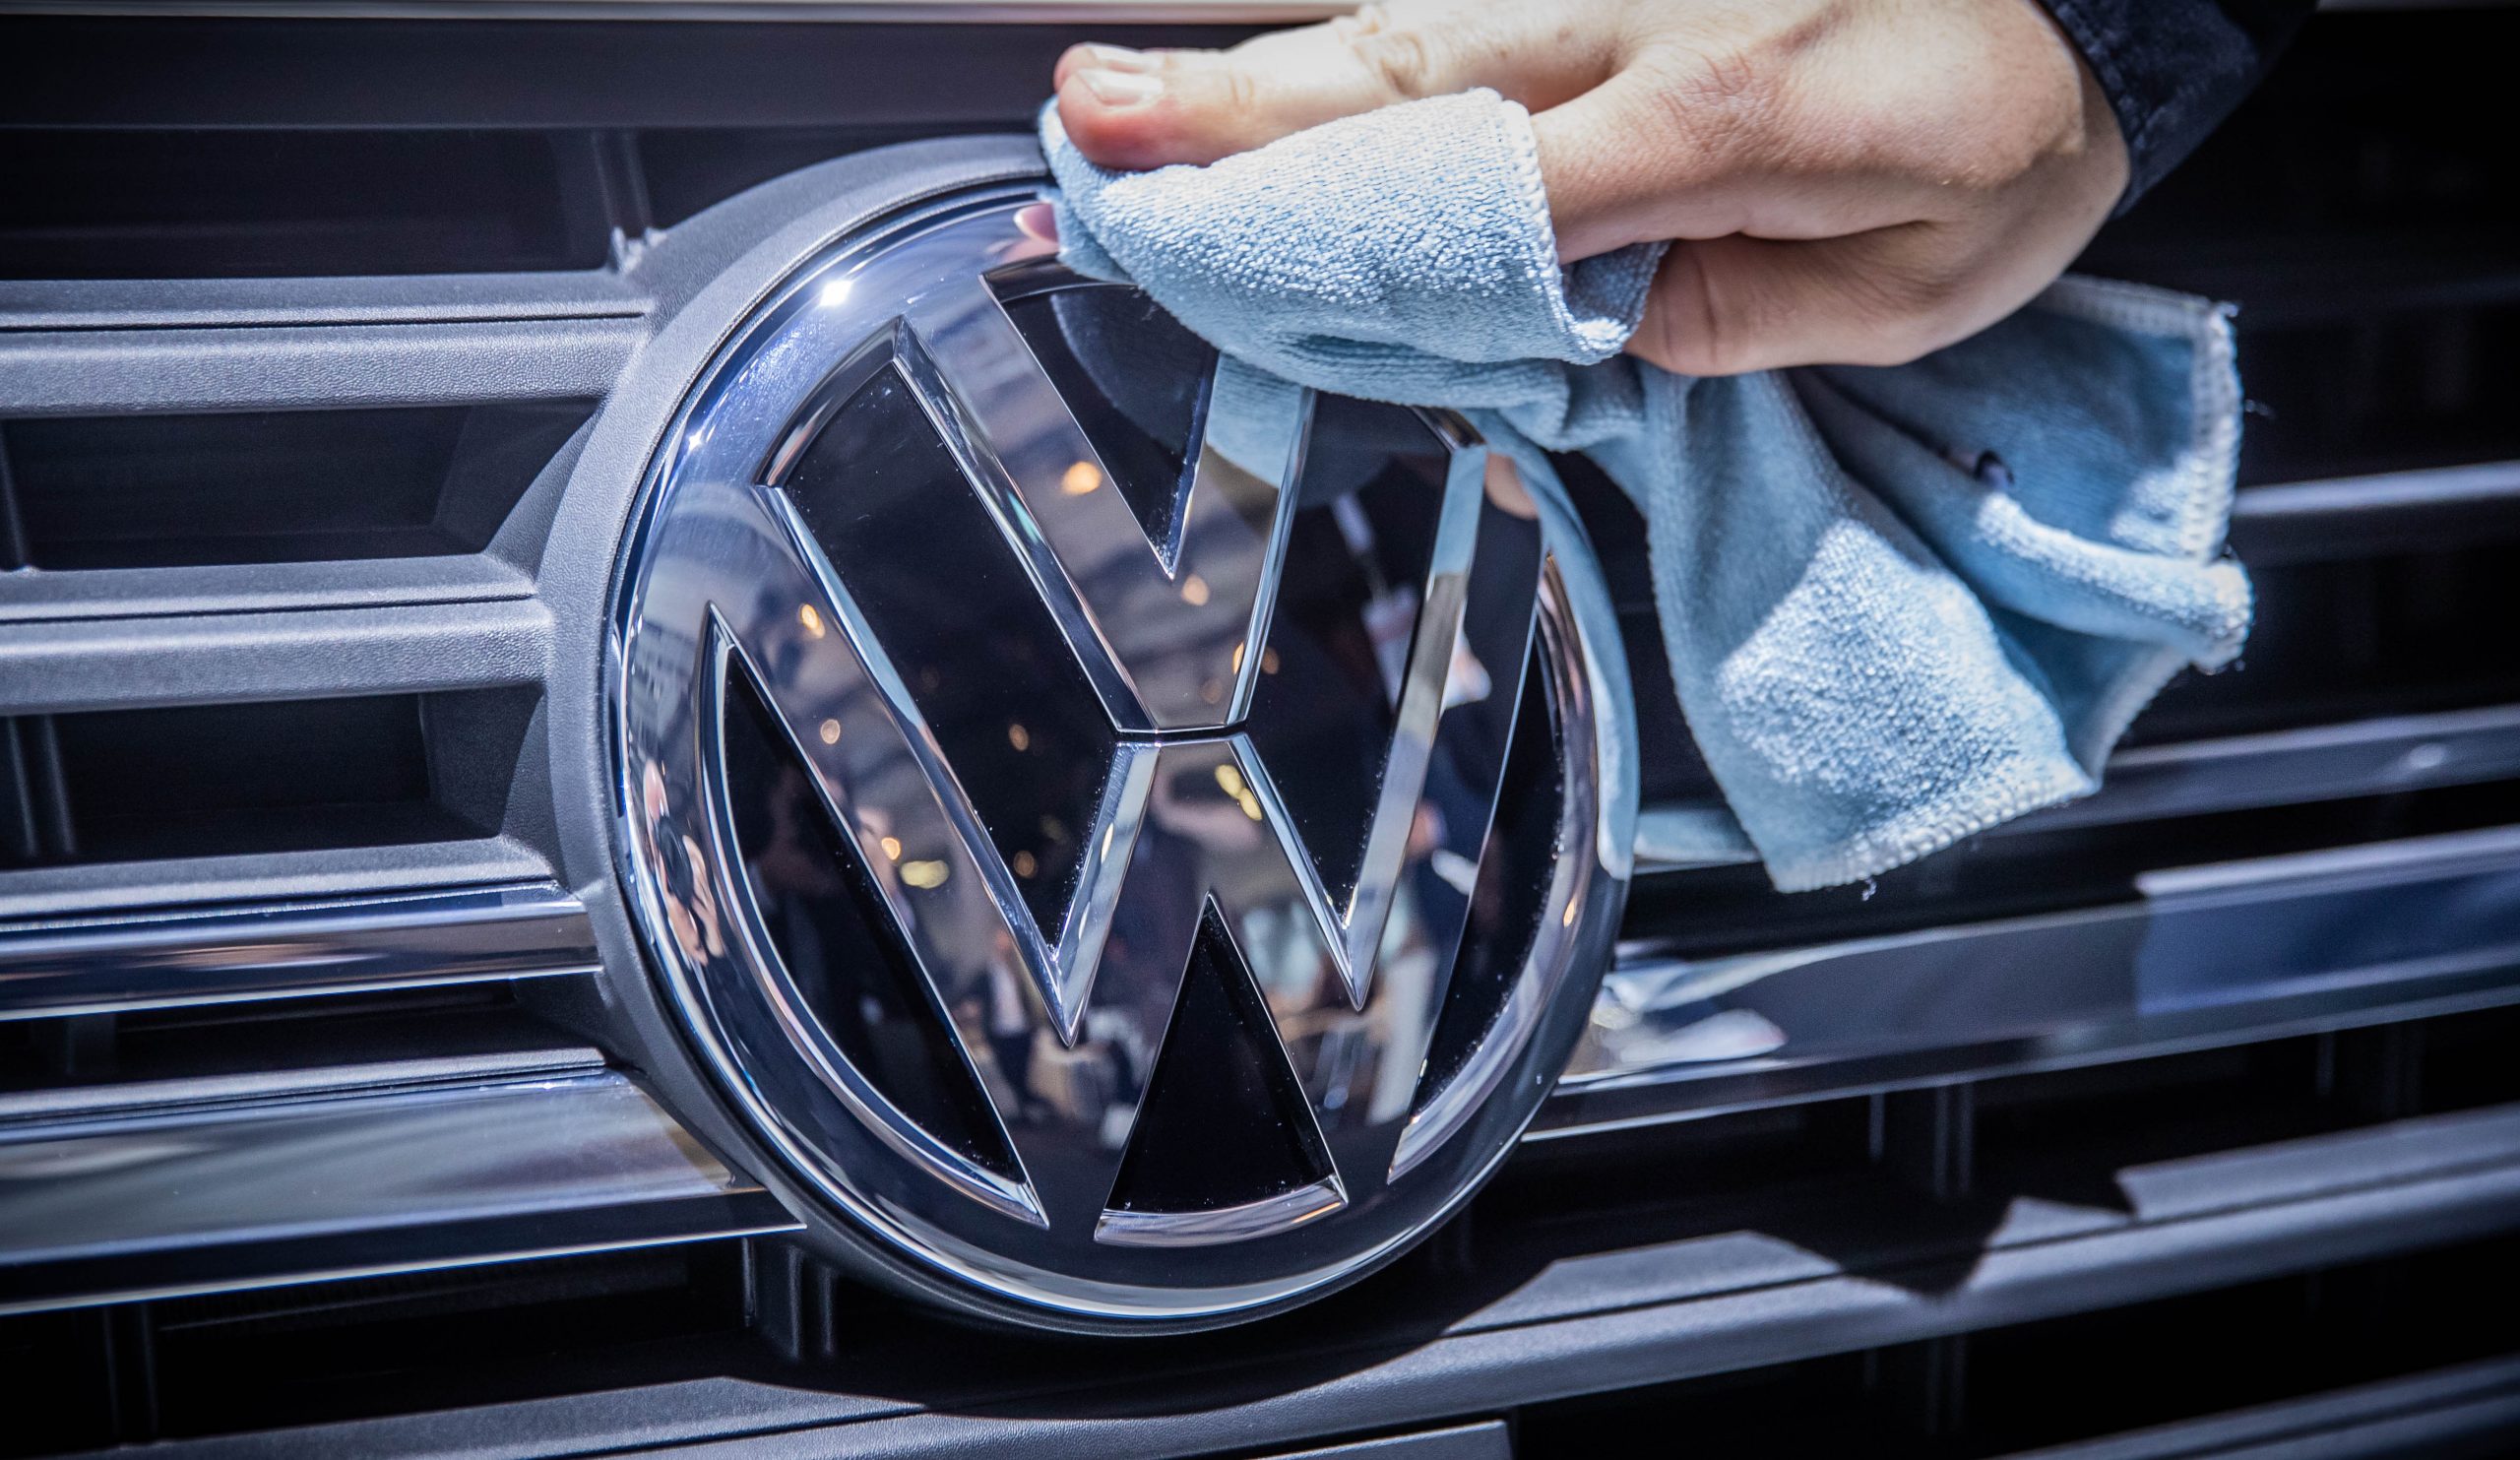 A person shines a Volkswagen logo on the grille of a car